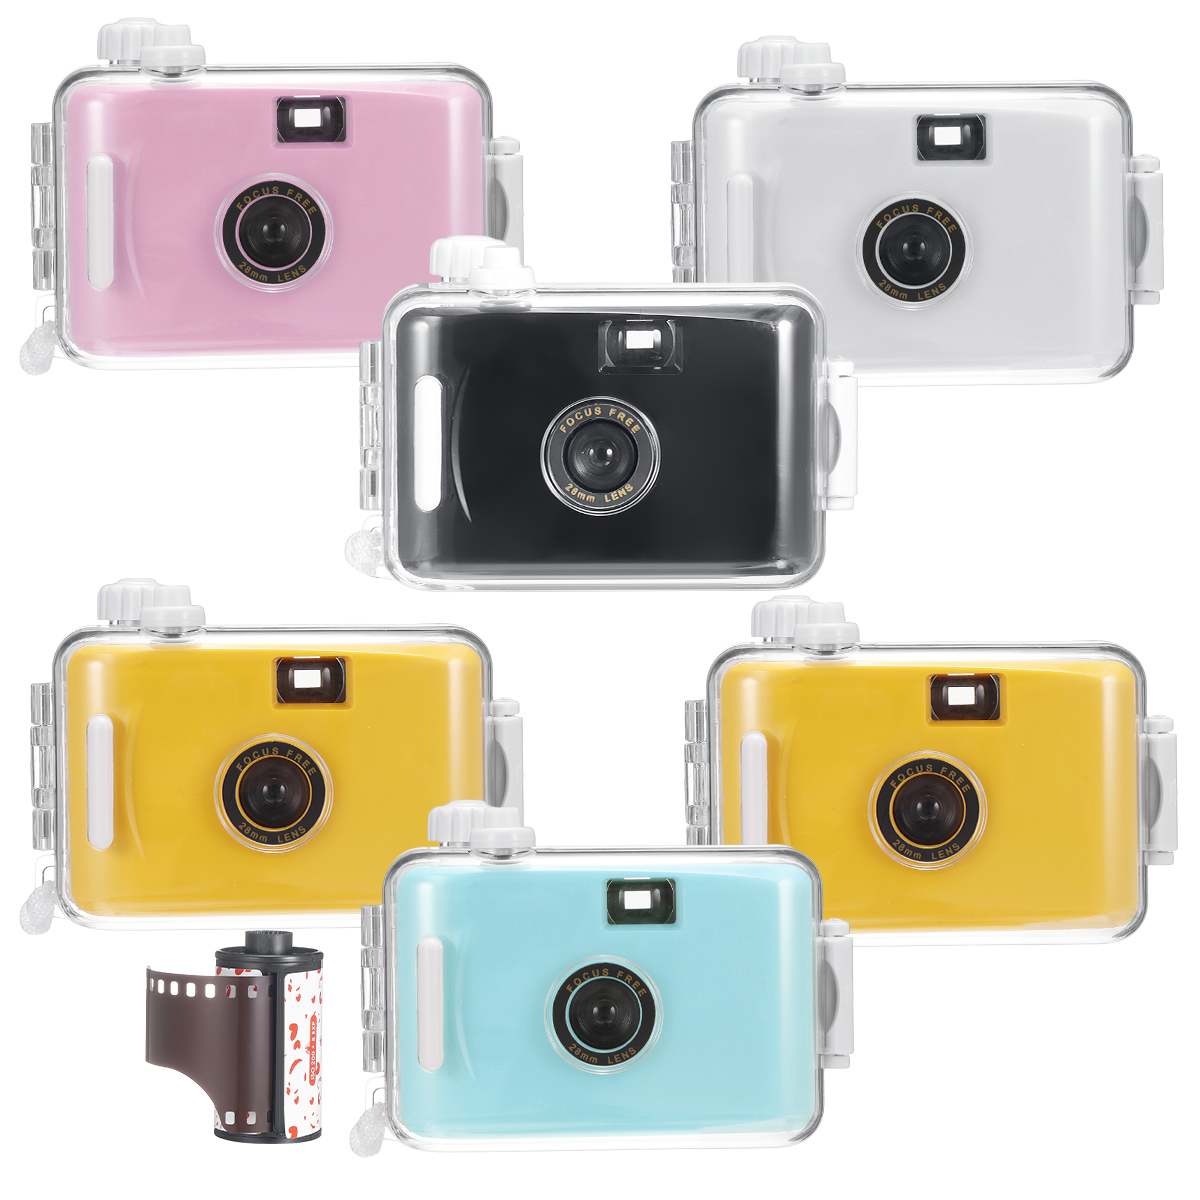 Waterproof-Disposable-Camera-Portable-Film-Camera-With-DIY-Case-for-Graduation-Trip-Christmas-1952625-10